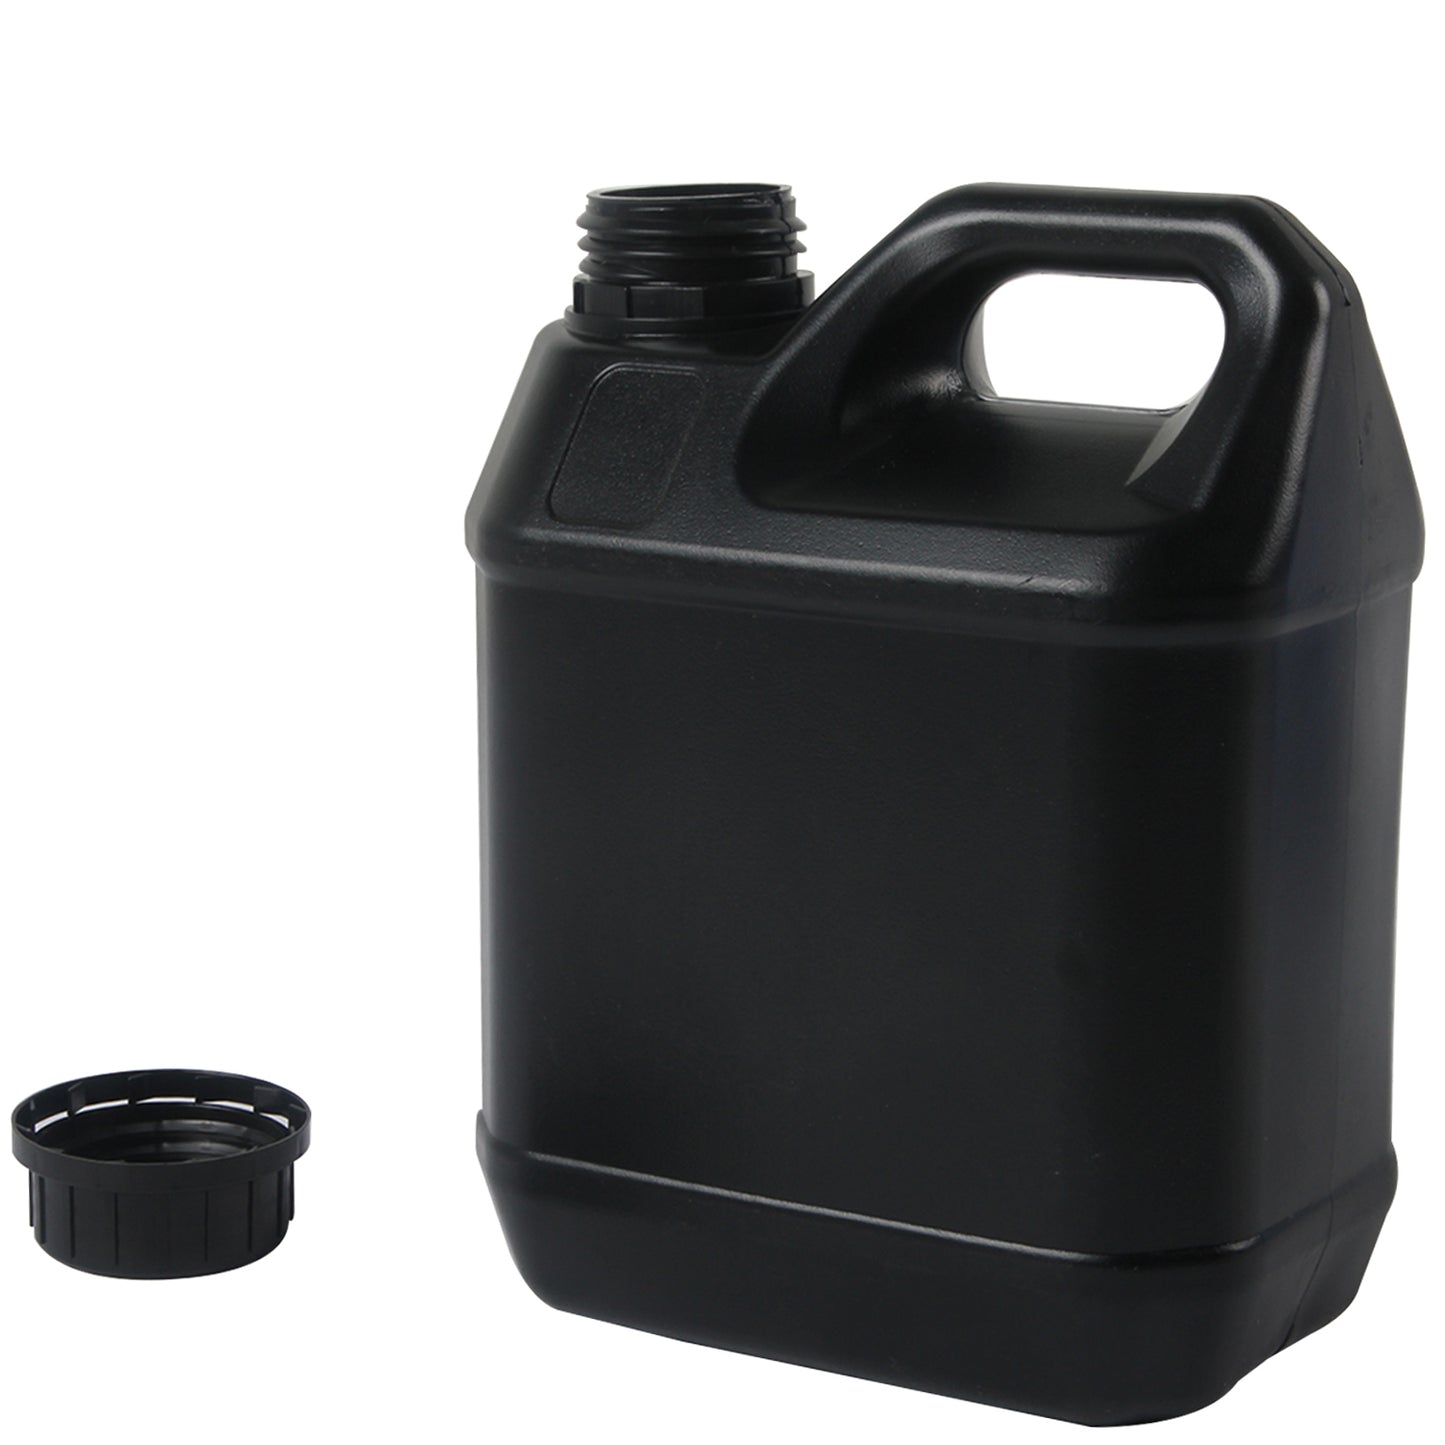 1x 2L Darkroom Chemical Liquid Storage Bottles Kettle with Caps for Developer Fixer Stopper Laboratory